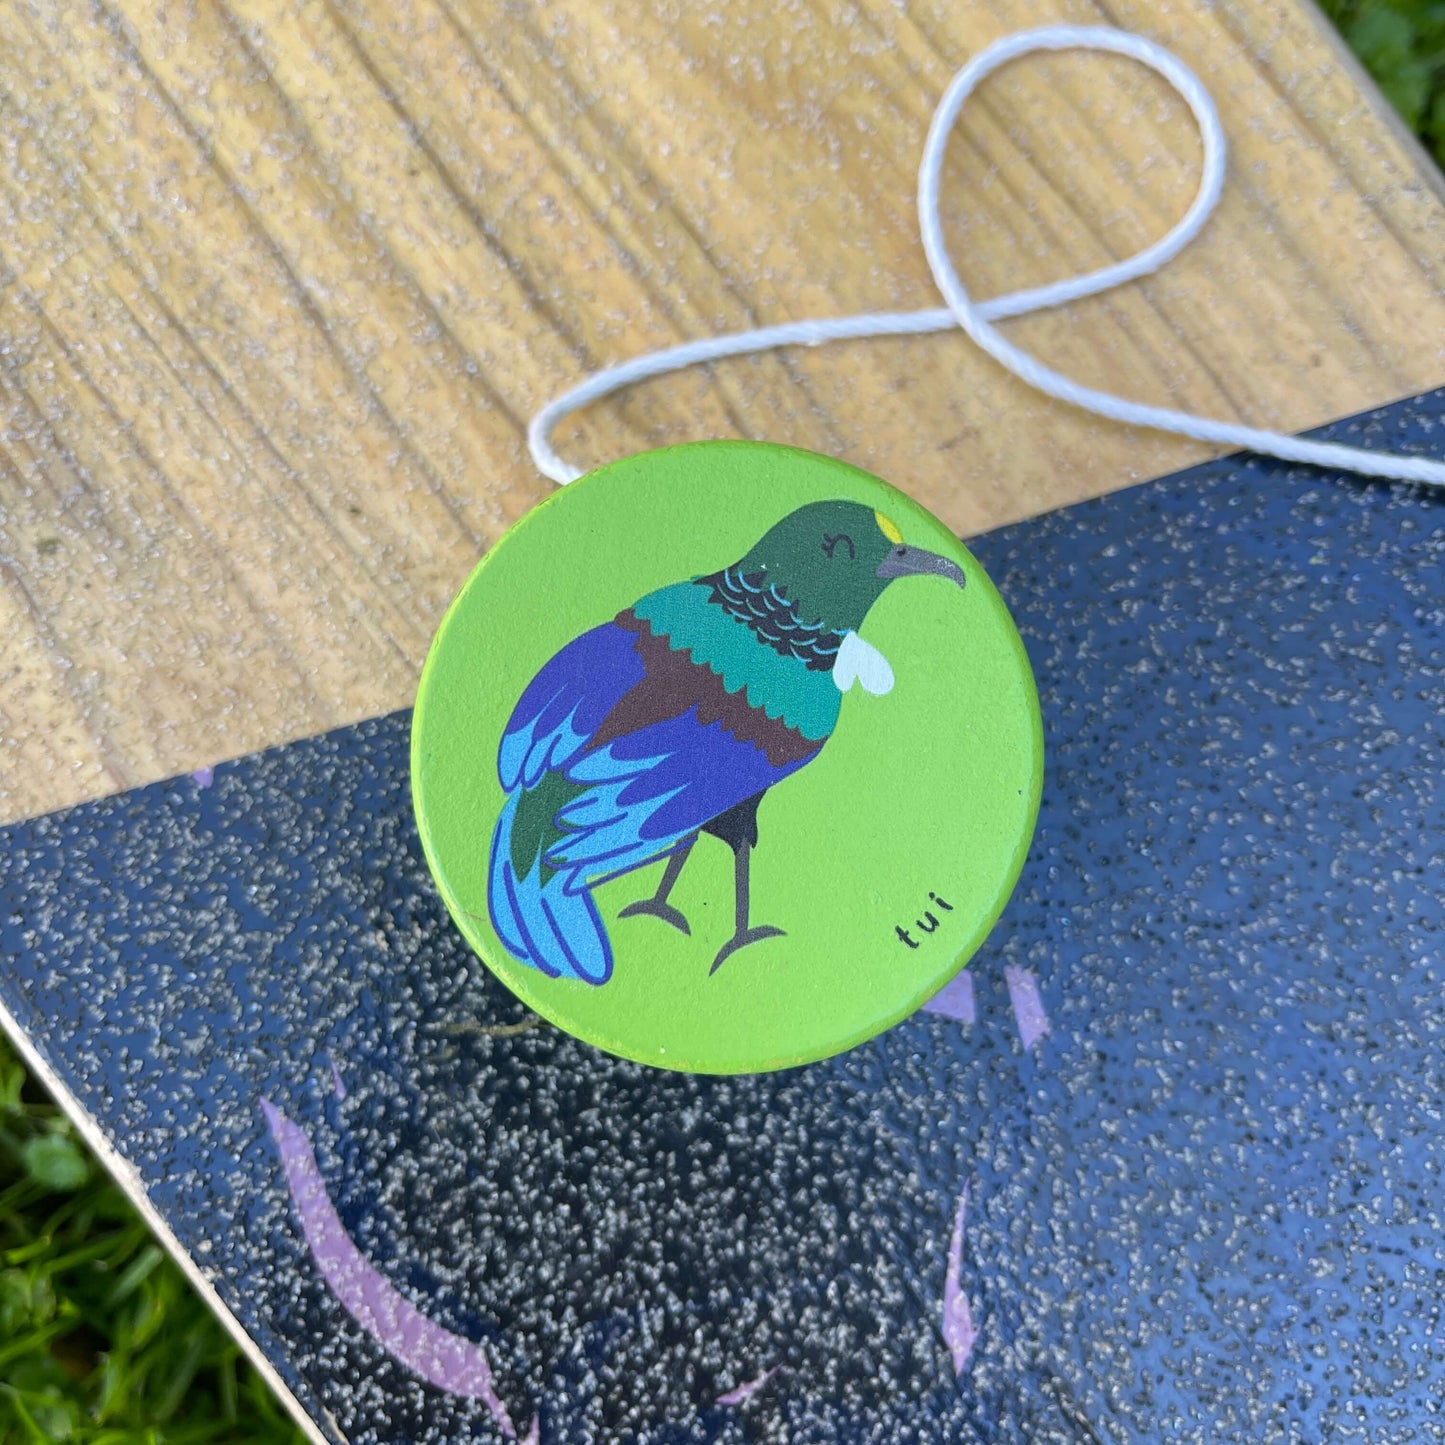 Bright green wooden yoyo with a Tui bird painted on it sitting on a skateboard.